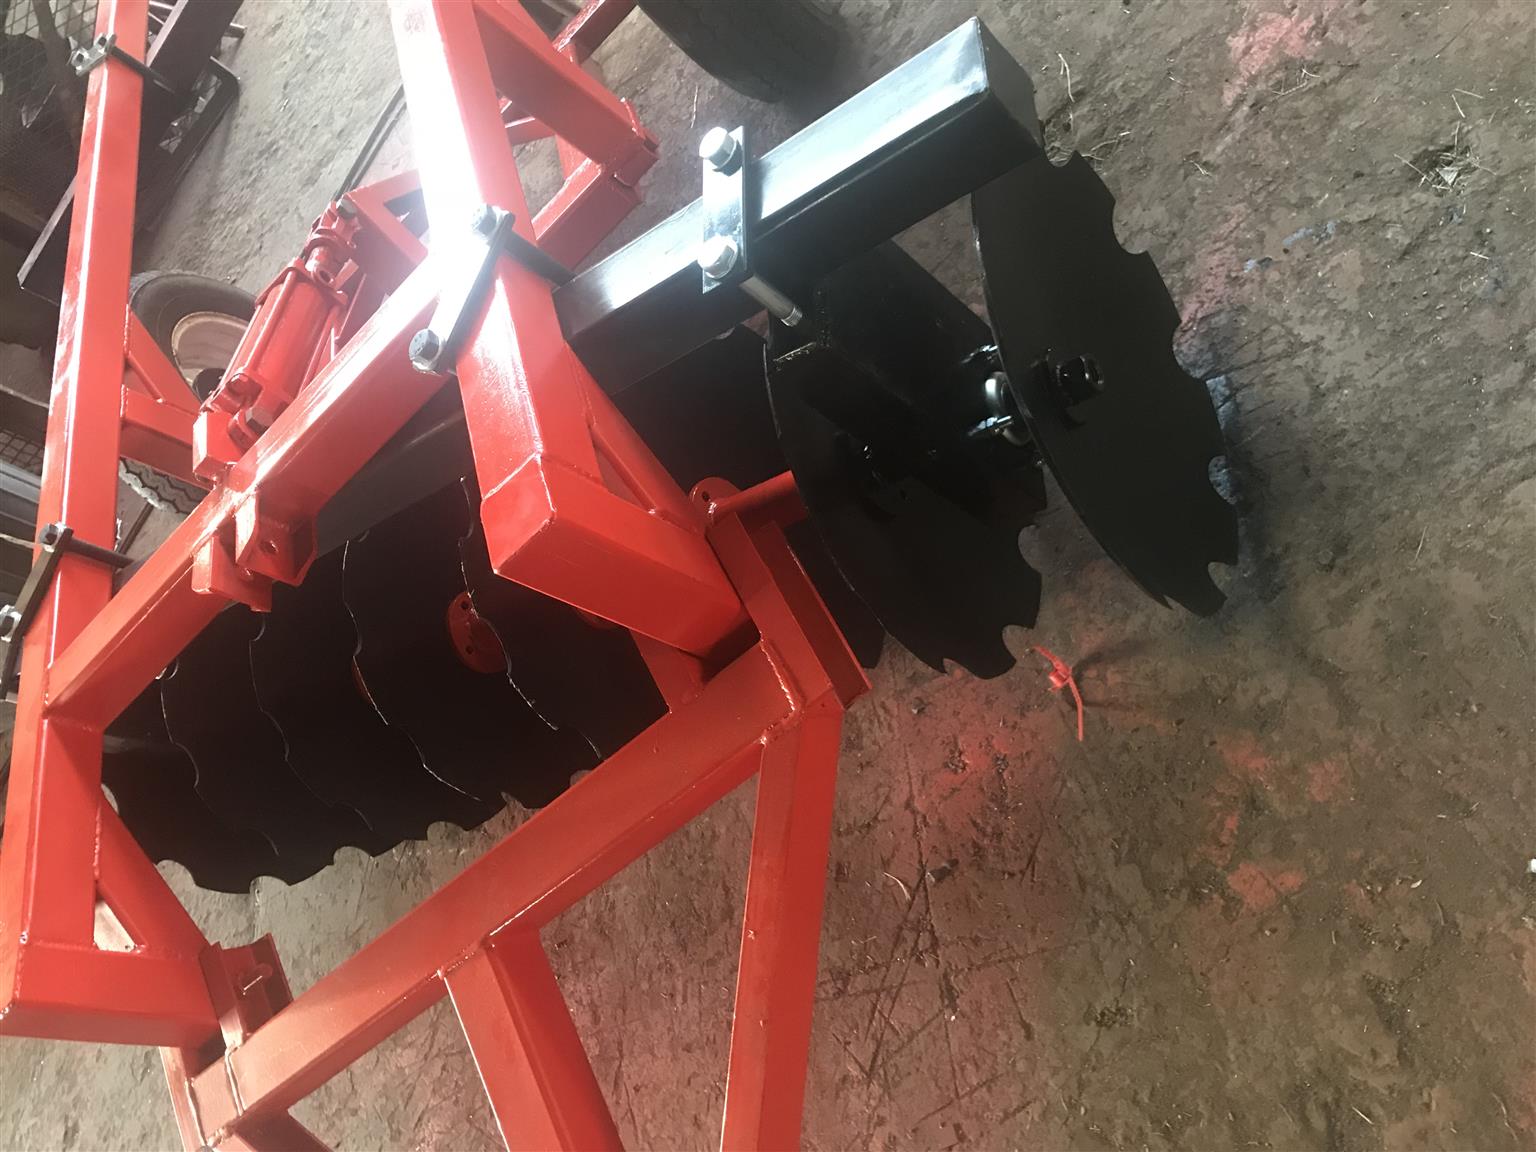 New hydraulic discs for sale 